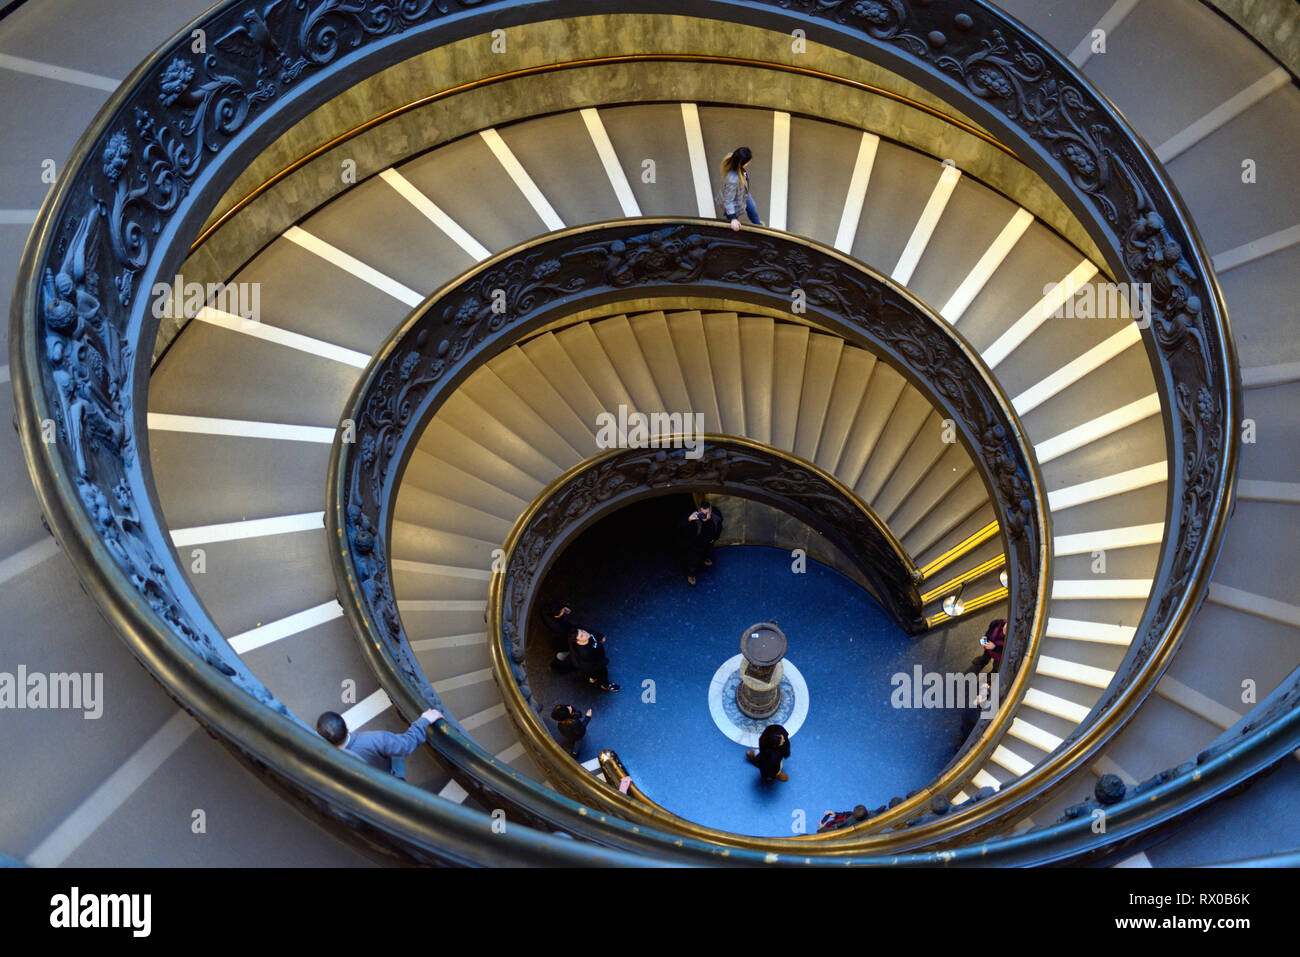 Double helix Spiral Staircase, or Bramante Staircase, designed by Giuseppo Momo in 1932, Pio-Clementine Museum, Vatican Museums Stock Photo